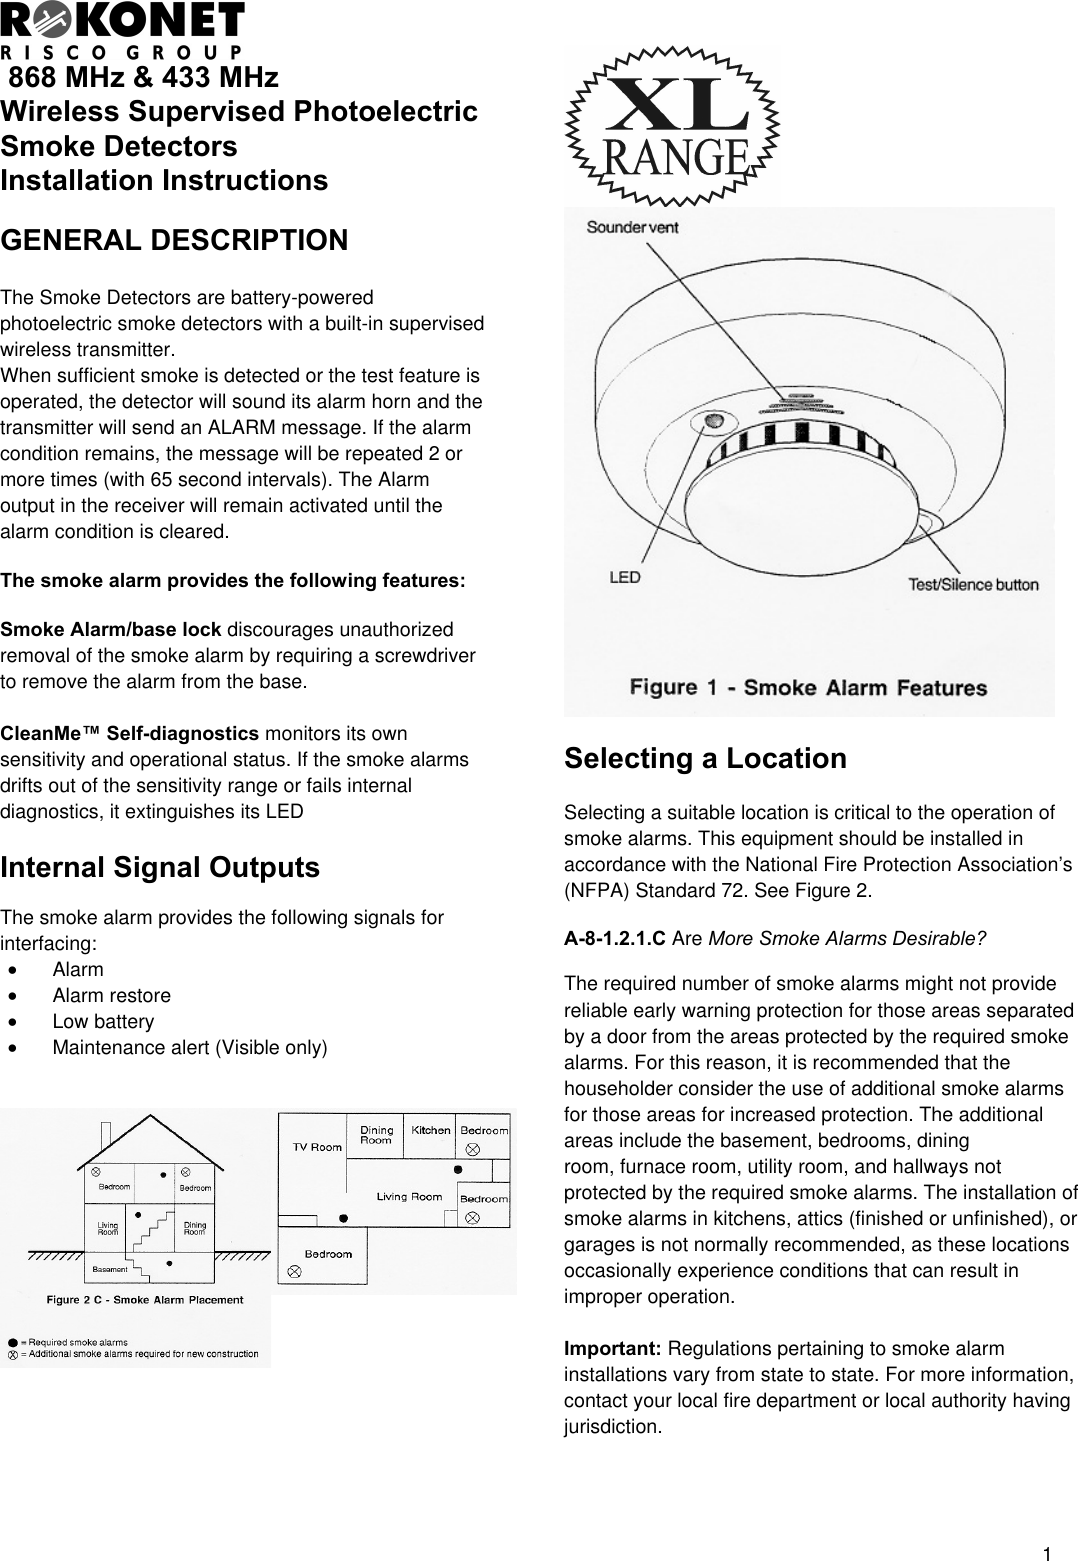  1  868 MHz &amp; 433 MHz Wireless Supervised Photoelectric Smoke Detectors  Installation Instructions  GENERAL DESCRIPTION    The Smoke Detectors are battery-powered photoelectric smoke detectors with a built-in supervised wireless transmitter.  When sufficient smoke is detected or the test feature is operated, the detector will sound its alarm horn and the transmitter will send an ALARM message. If the alarm condition remains, the message will be repeated 2 or more times (with 65 second intervals). The Alarm output in the receiver will remain activated until the alarm condition is cleared.  The smoke alarm provides the following features:  Smoke Alarm/base lock discourages unauthorized removal of the smoke alarm by requiring a screwdriver to remove the alarm from the base.  CleanMe™ Self-diagnostics monitors its own sensitivity and operational status. If the smoke alarms drifts out of the sensitivity range or fails internal diagnostics, it extinguishes its LED  Internal Signal Outputs  The smoke alarm provides the following signals for interfacing: •  Alarm  •  Alarm restore •  Low battery •  Maintenance alert (Visible only)               Selecting a Location  Selecting a suitable location is critical to the operation of smoke alarms. This equipment should be installed in accordance with the National Fire Protection Association’s (NFPA) Standard 72. See Figure 2.  A-8-1.2.1.C Are More Smoke Alarms Desirable?  The required number of smoke alarms might not provide reliable early warning protection for those areas separated by a door from the areas protected by the required smoke alarms. For this reason, it is recommended that the householder consider the use of additional smoke alarms for those areas for increased protection. The additional areas include the basement, bedrooms, dining  room, furnace room, utility room, and hallways not protected by the required smoke alarms. The installation of smoke alarms in kitchens, attics (finished or unfinished), or garages is not normally recommended, as these locations occasionally experience conditions that can result in improper operation.  Important: Regulations pertaining to smoke alarm installations vary from state to state. For more information, contact your local fire department or local authority having jurisdiction. 